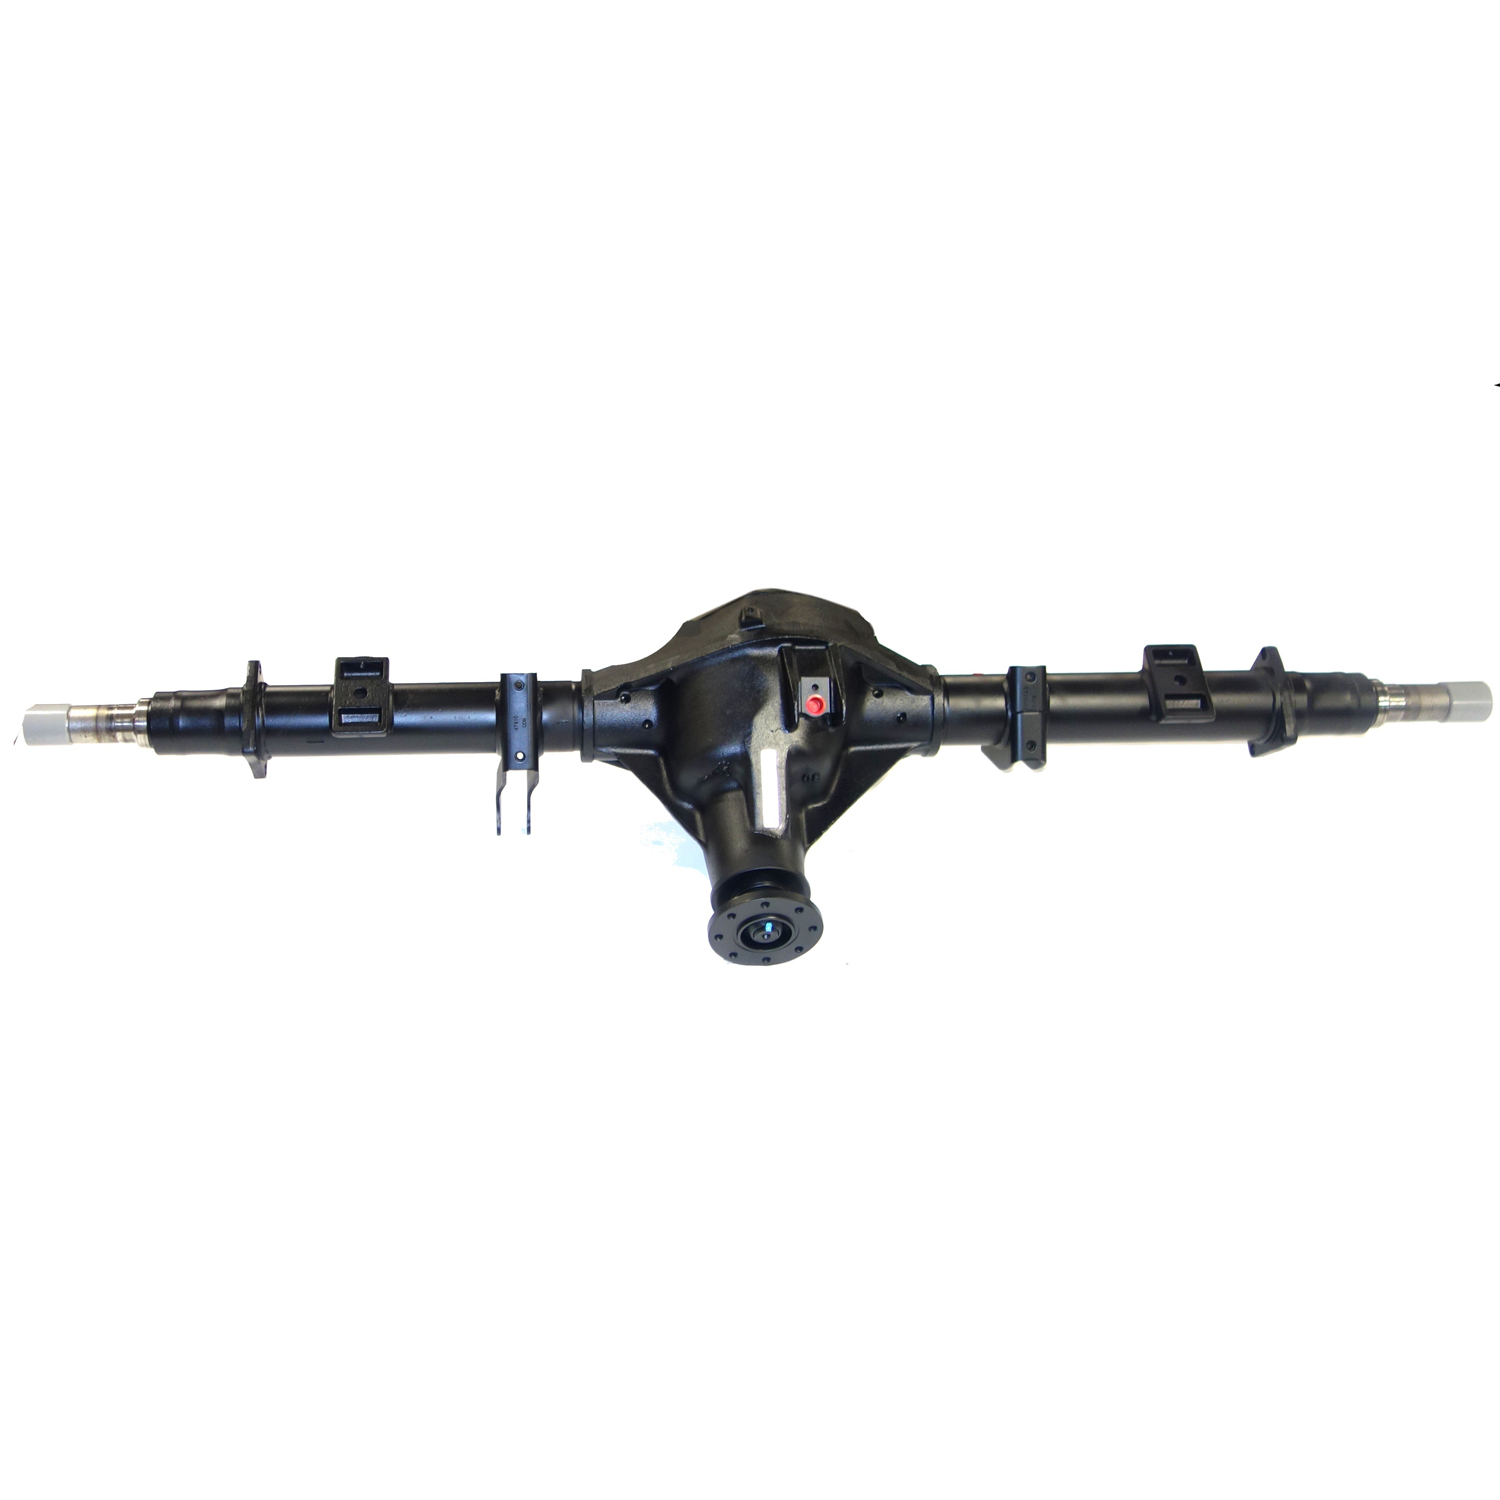 Remanufactured Complete Axle Assembly for Chy 9.25